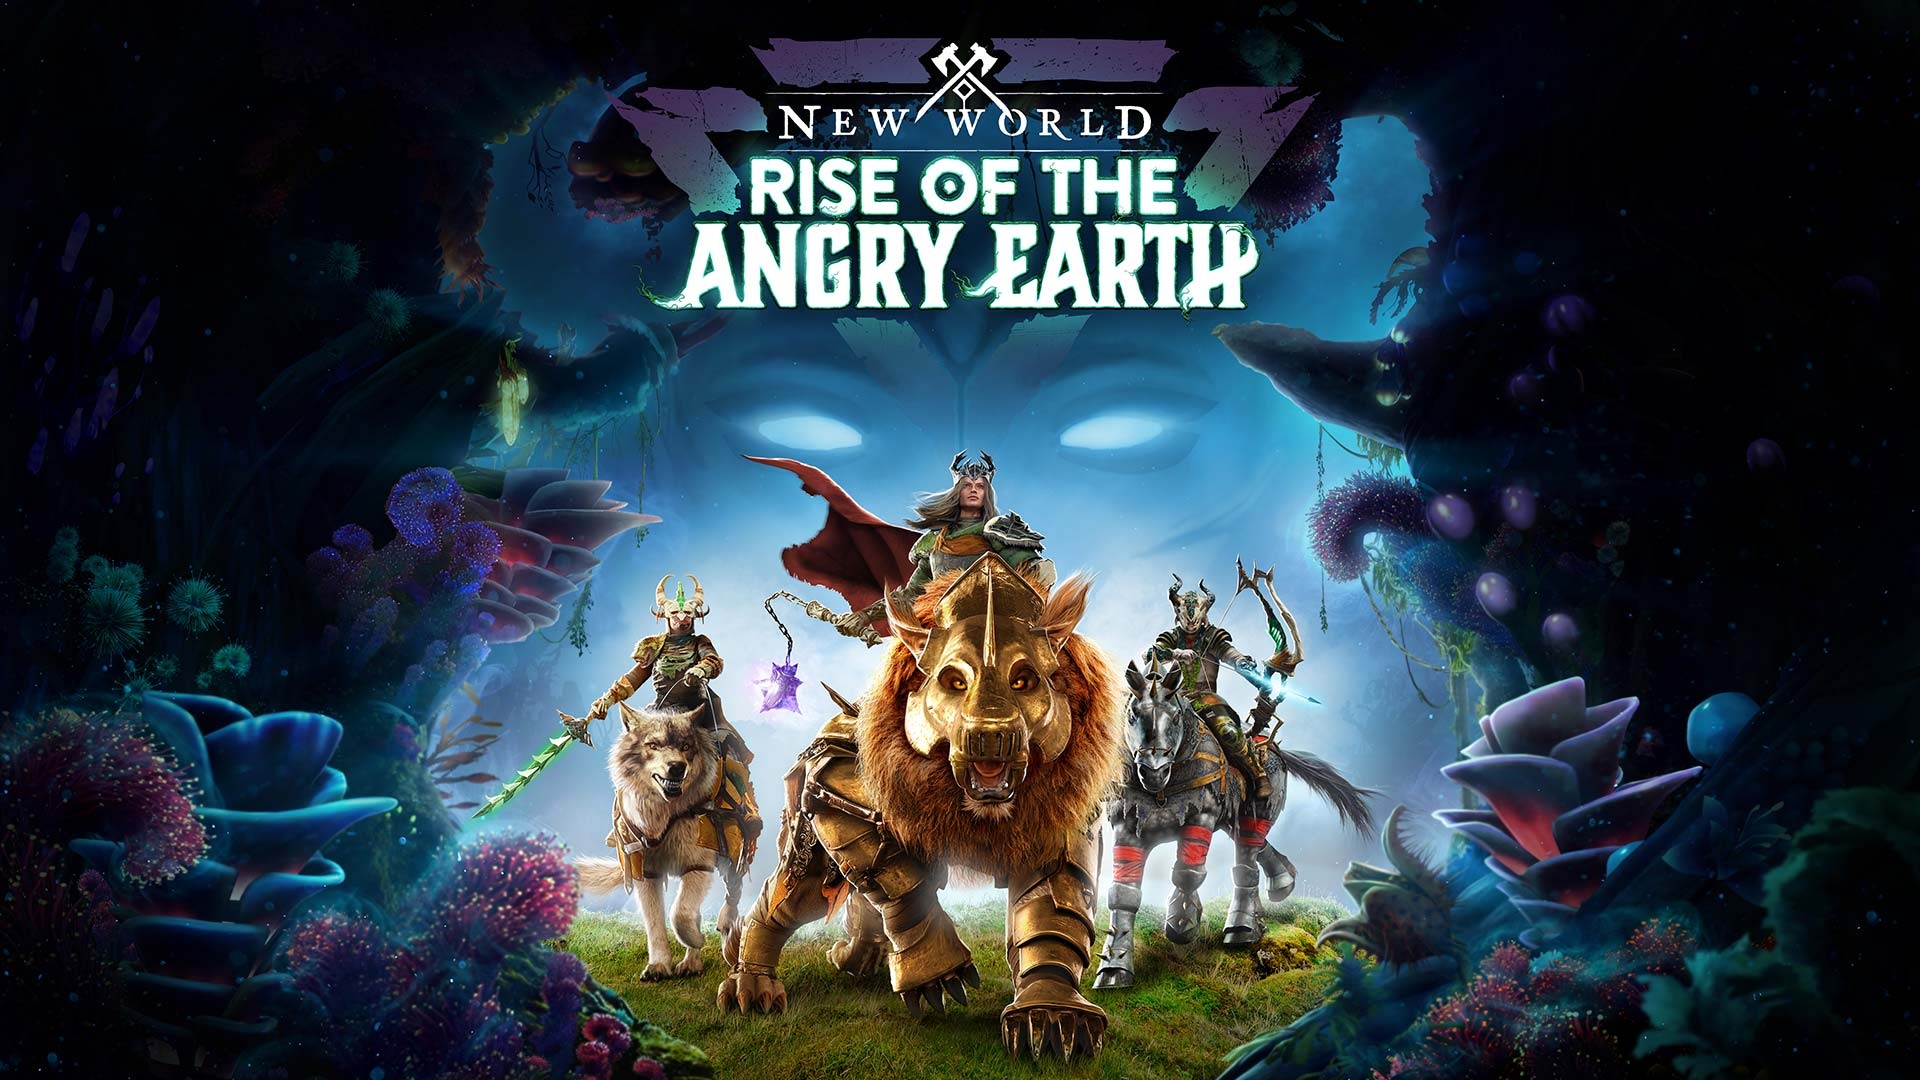 New World: Rise of the Angry Earth cover art